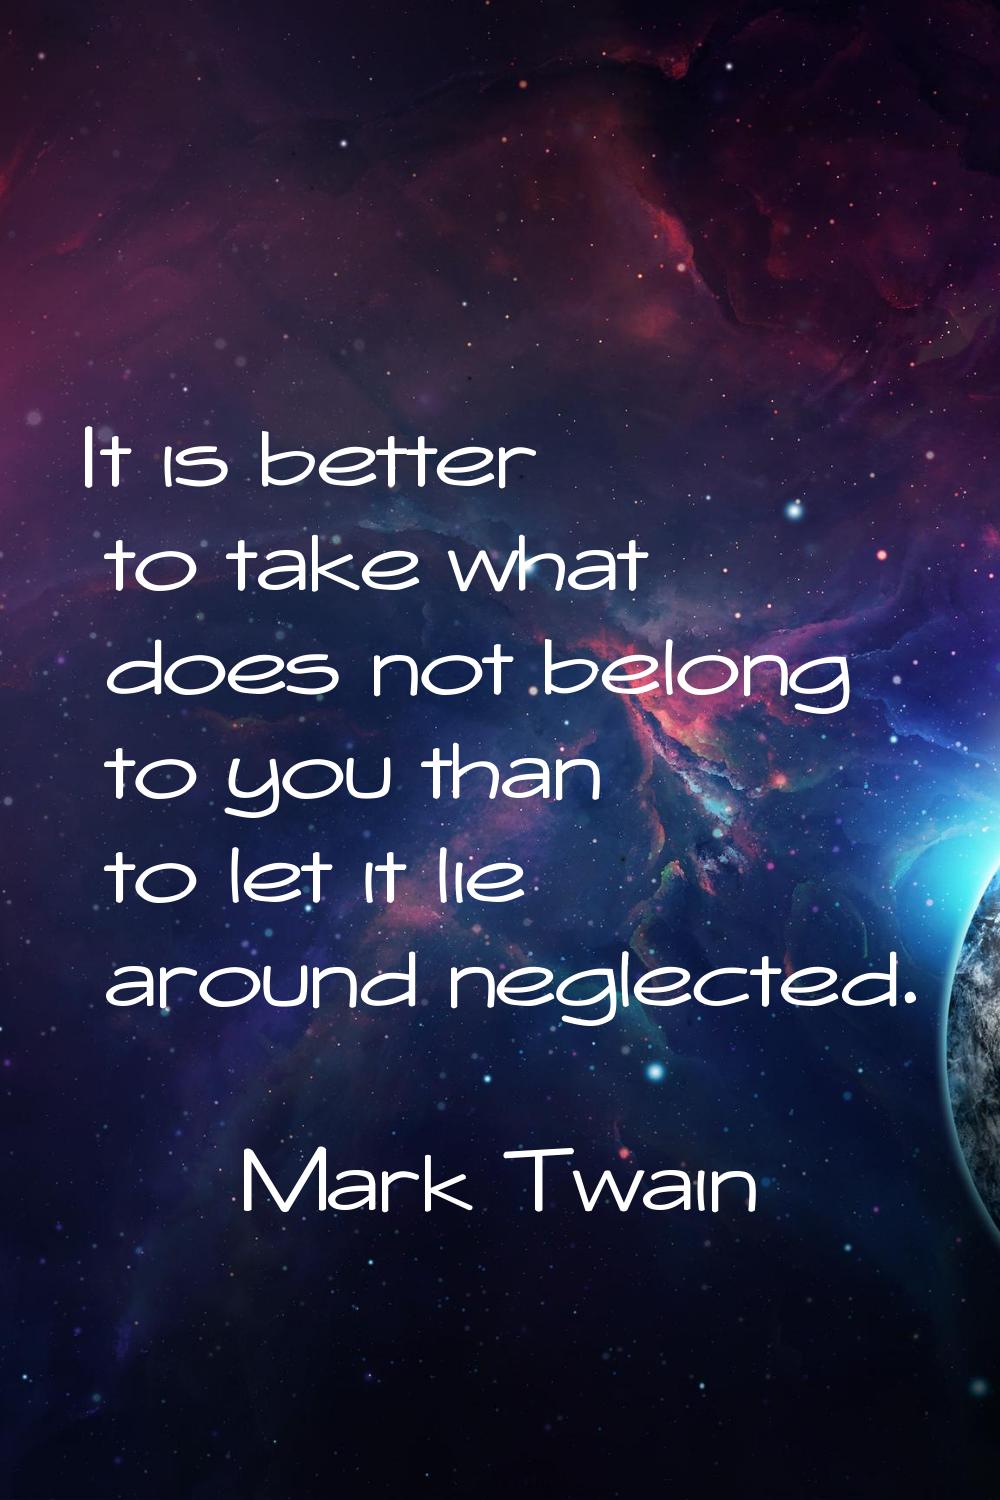 It is better to take what does not belong to you than to let it lie around neglected.